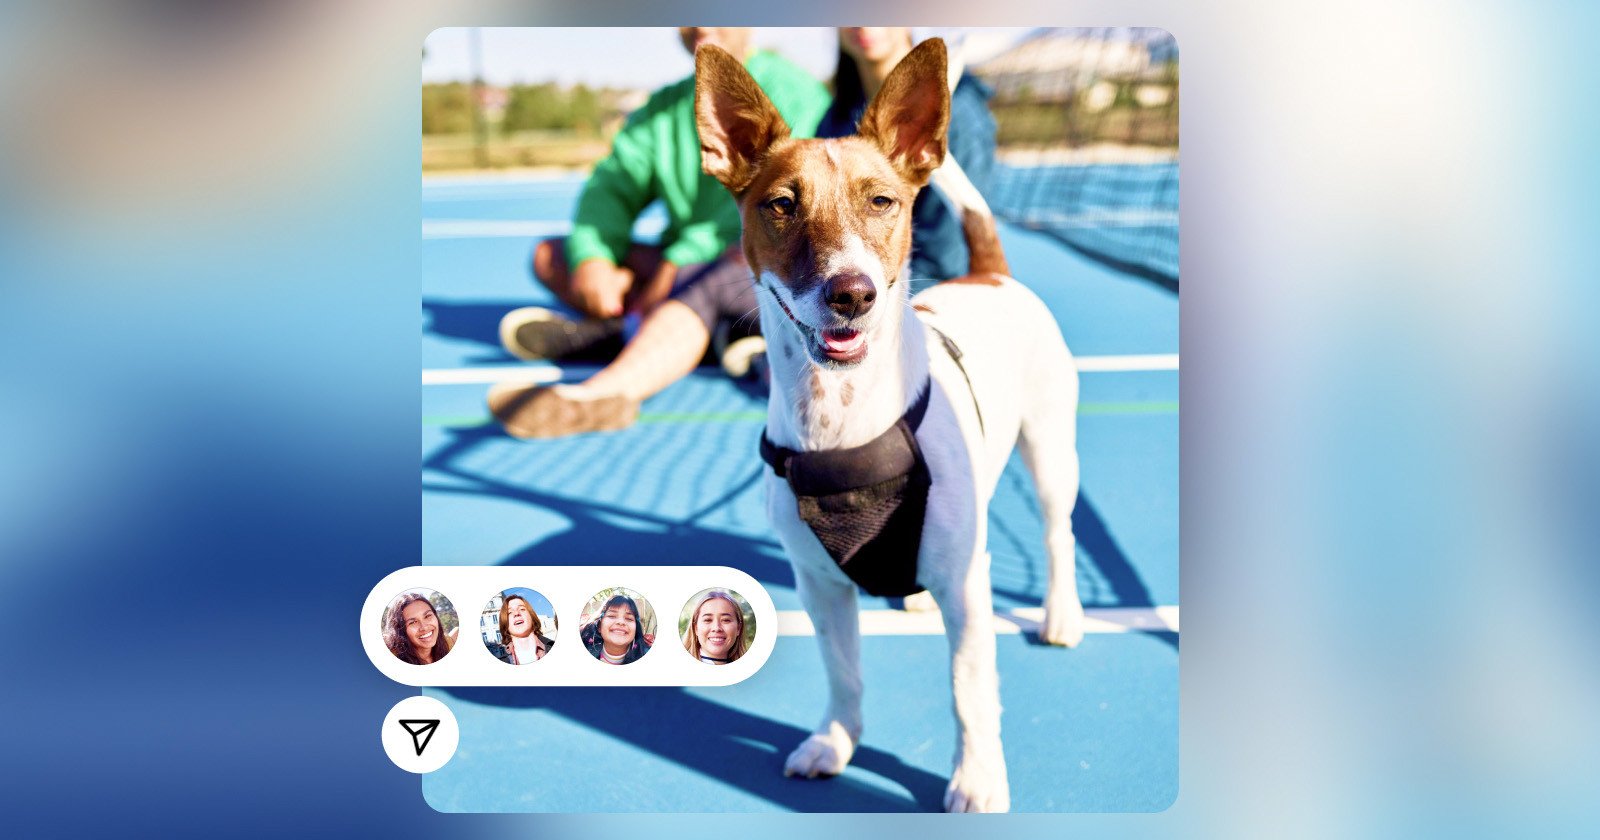 Instagram Launches Multiple New Enhanced Messaging Features